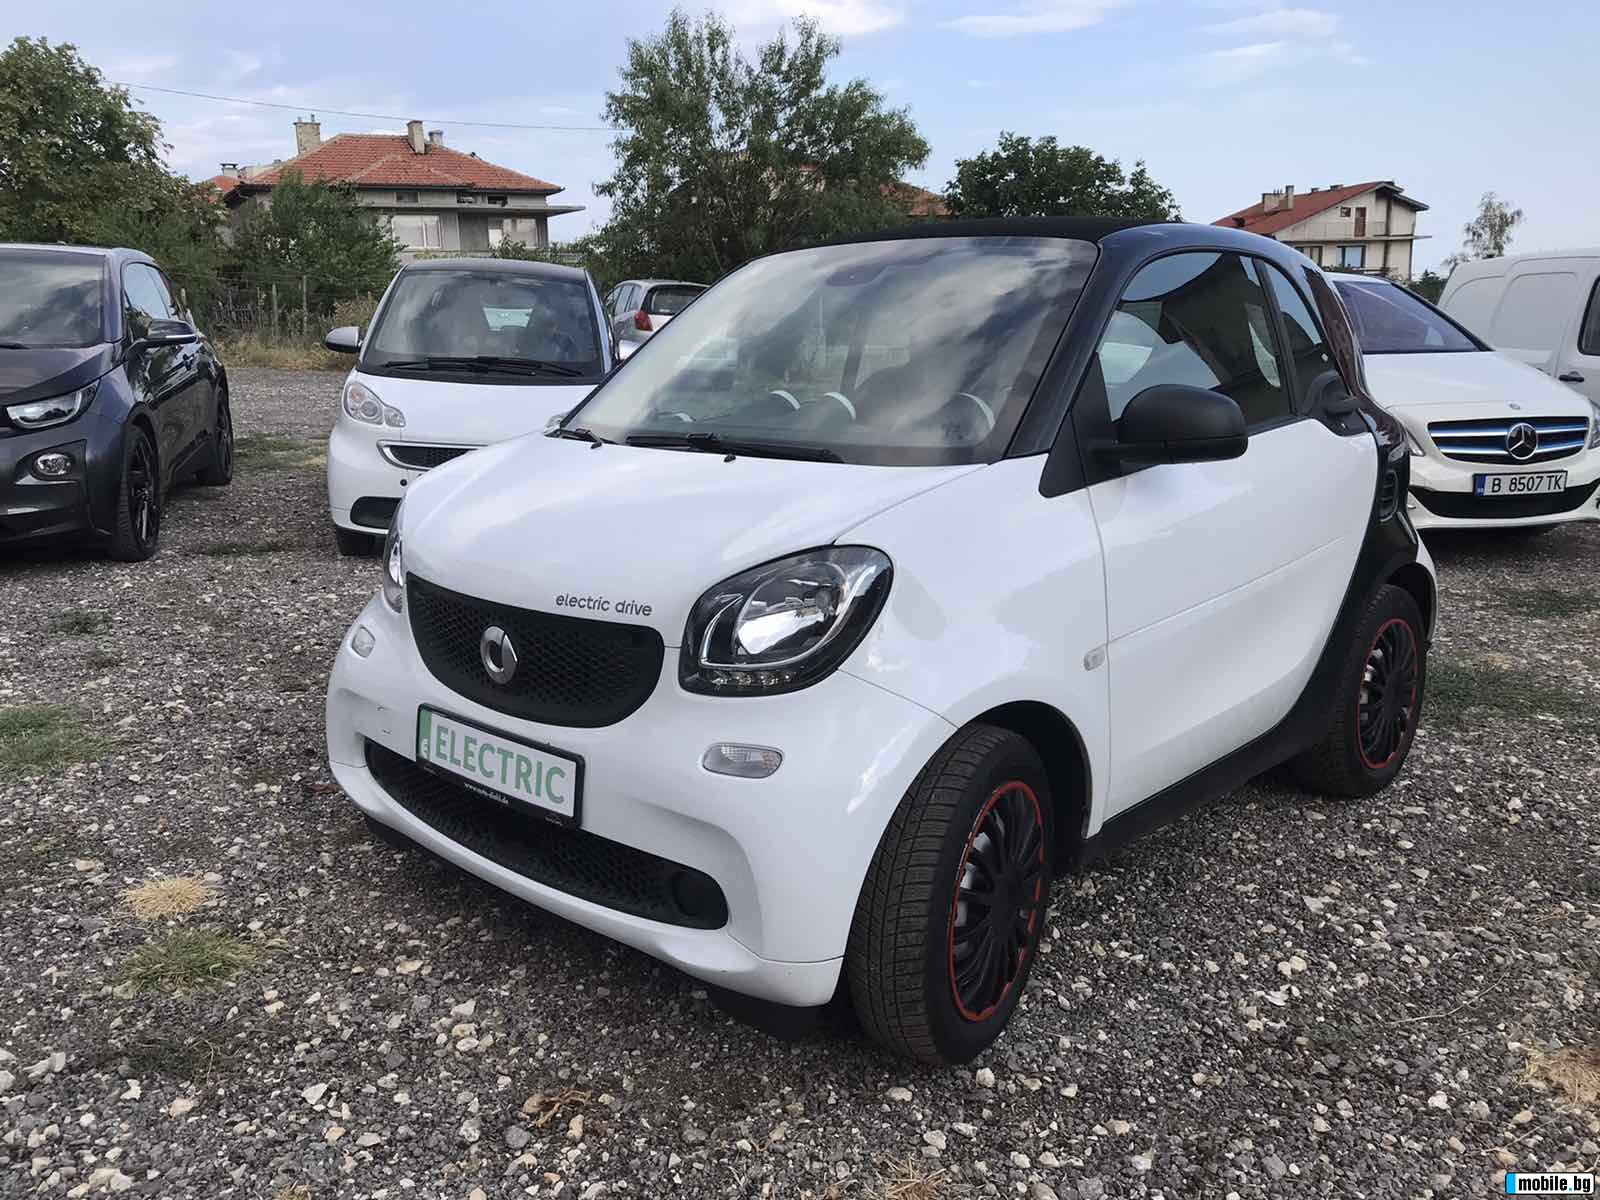 Smart Fortwo Electric Drive | Mobile.bg   1